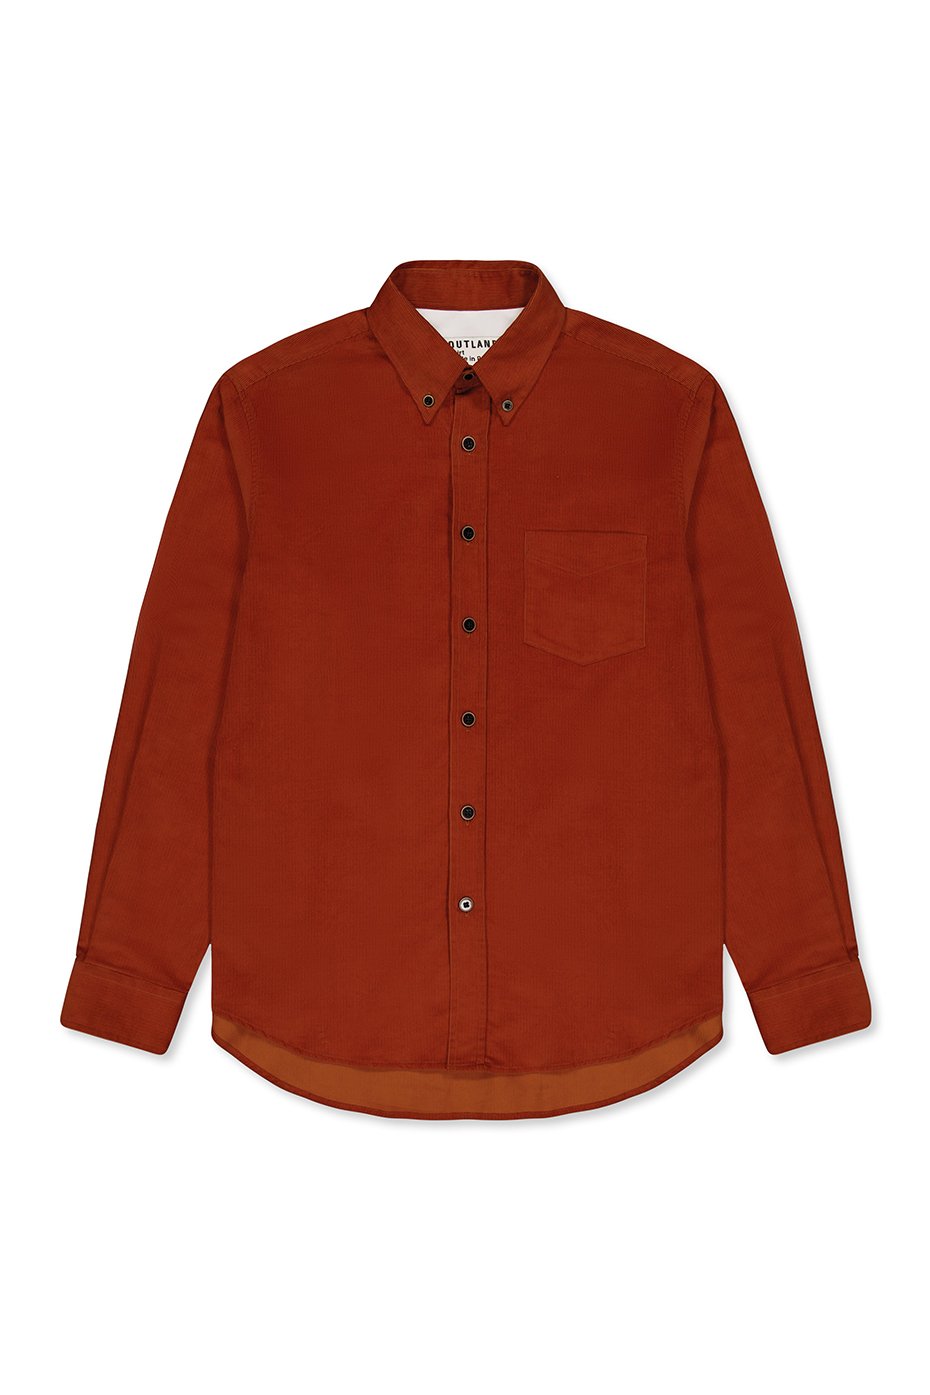 Outland Red Classic Cord Shirt